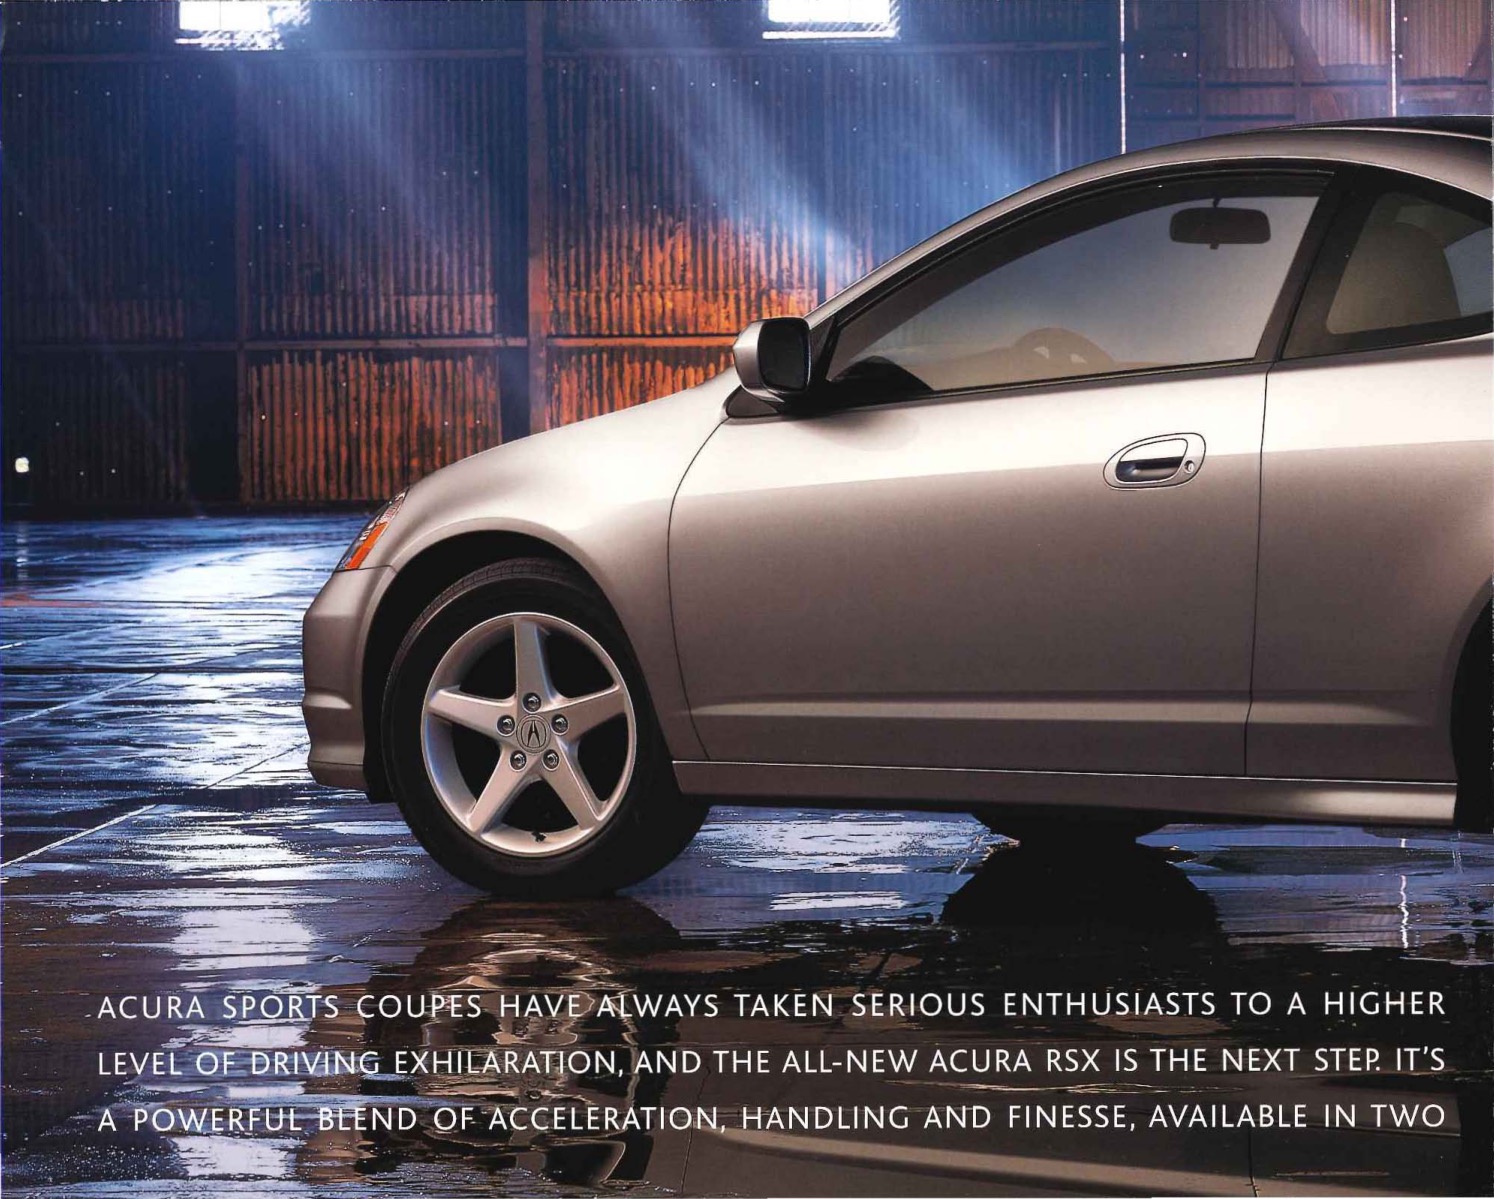 2002 Acura RSX and Type-S 24-page Original Car Sales Brochure Catalog 